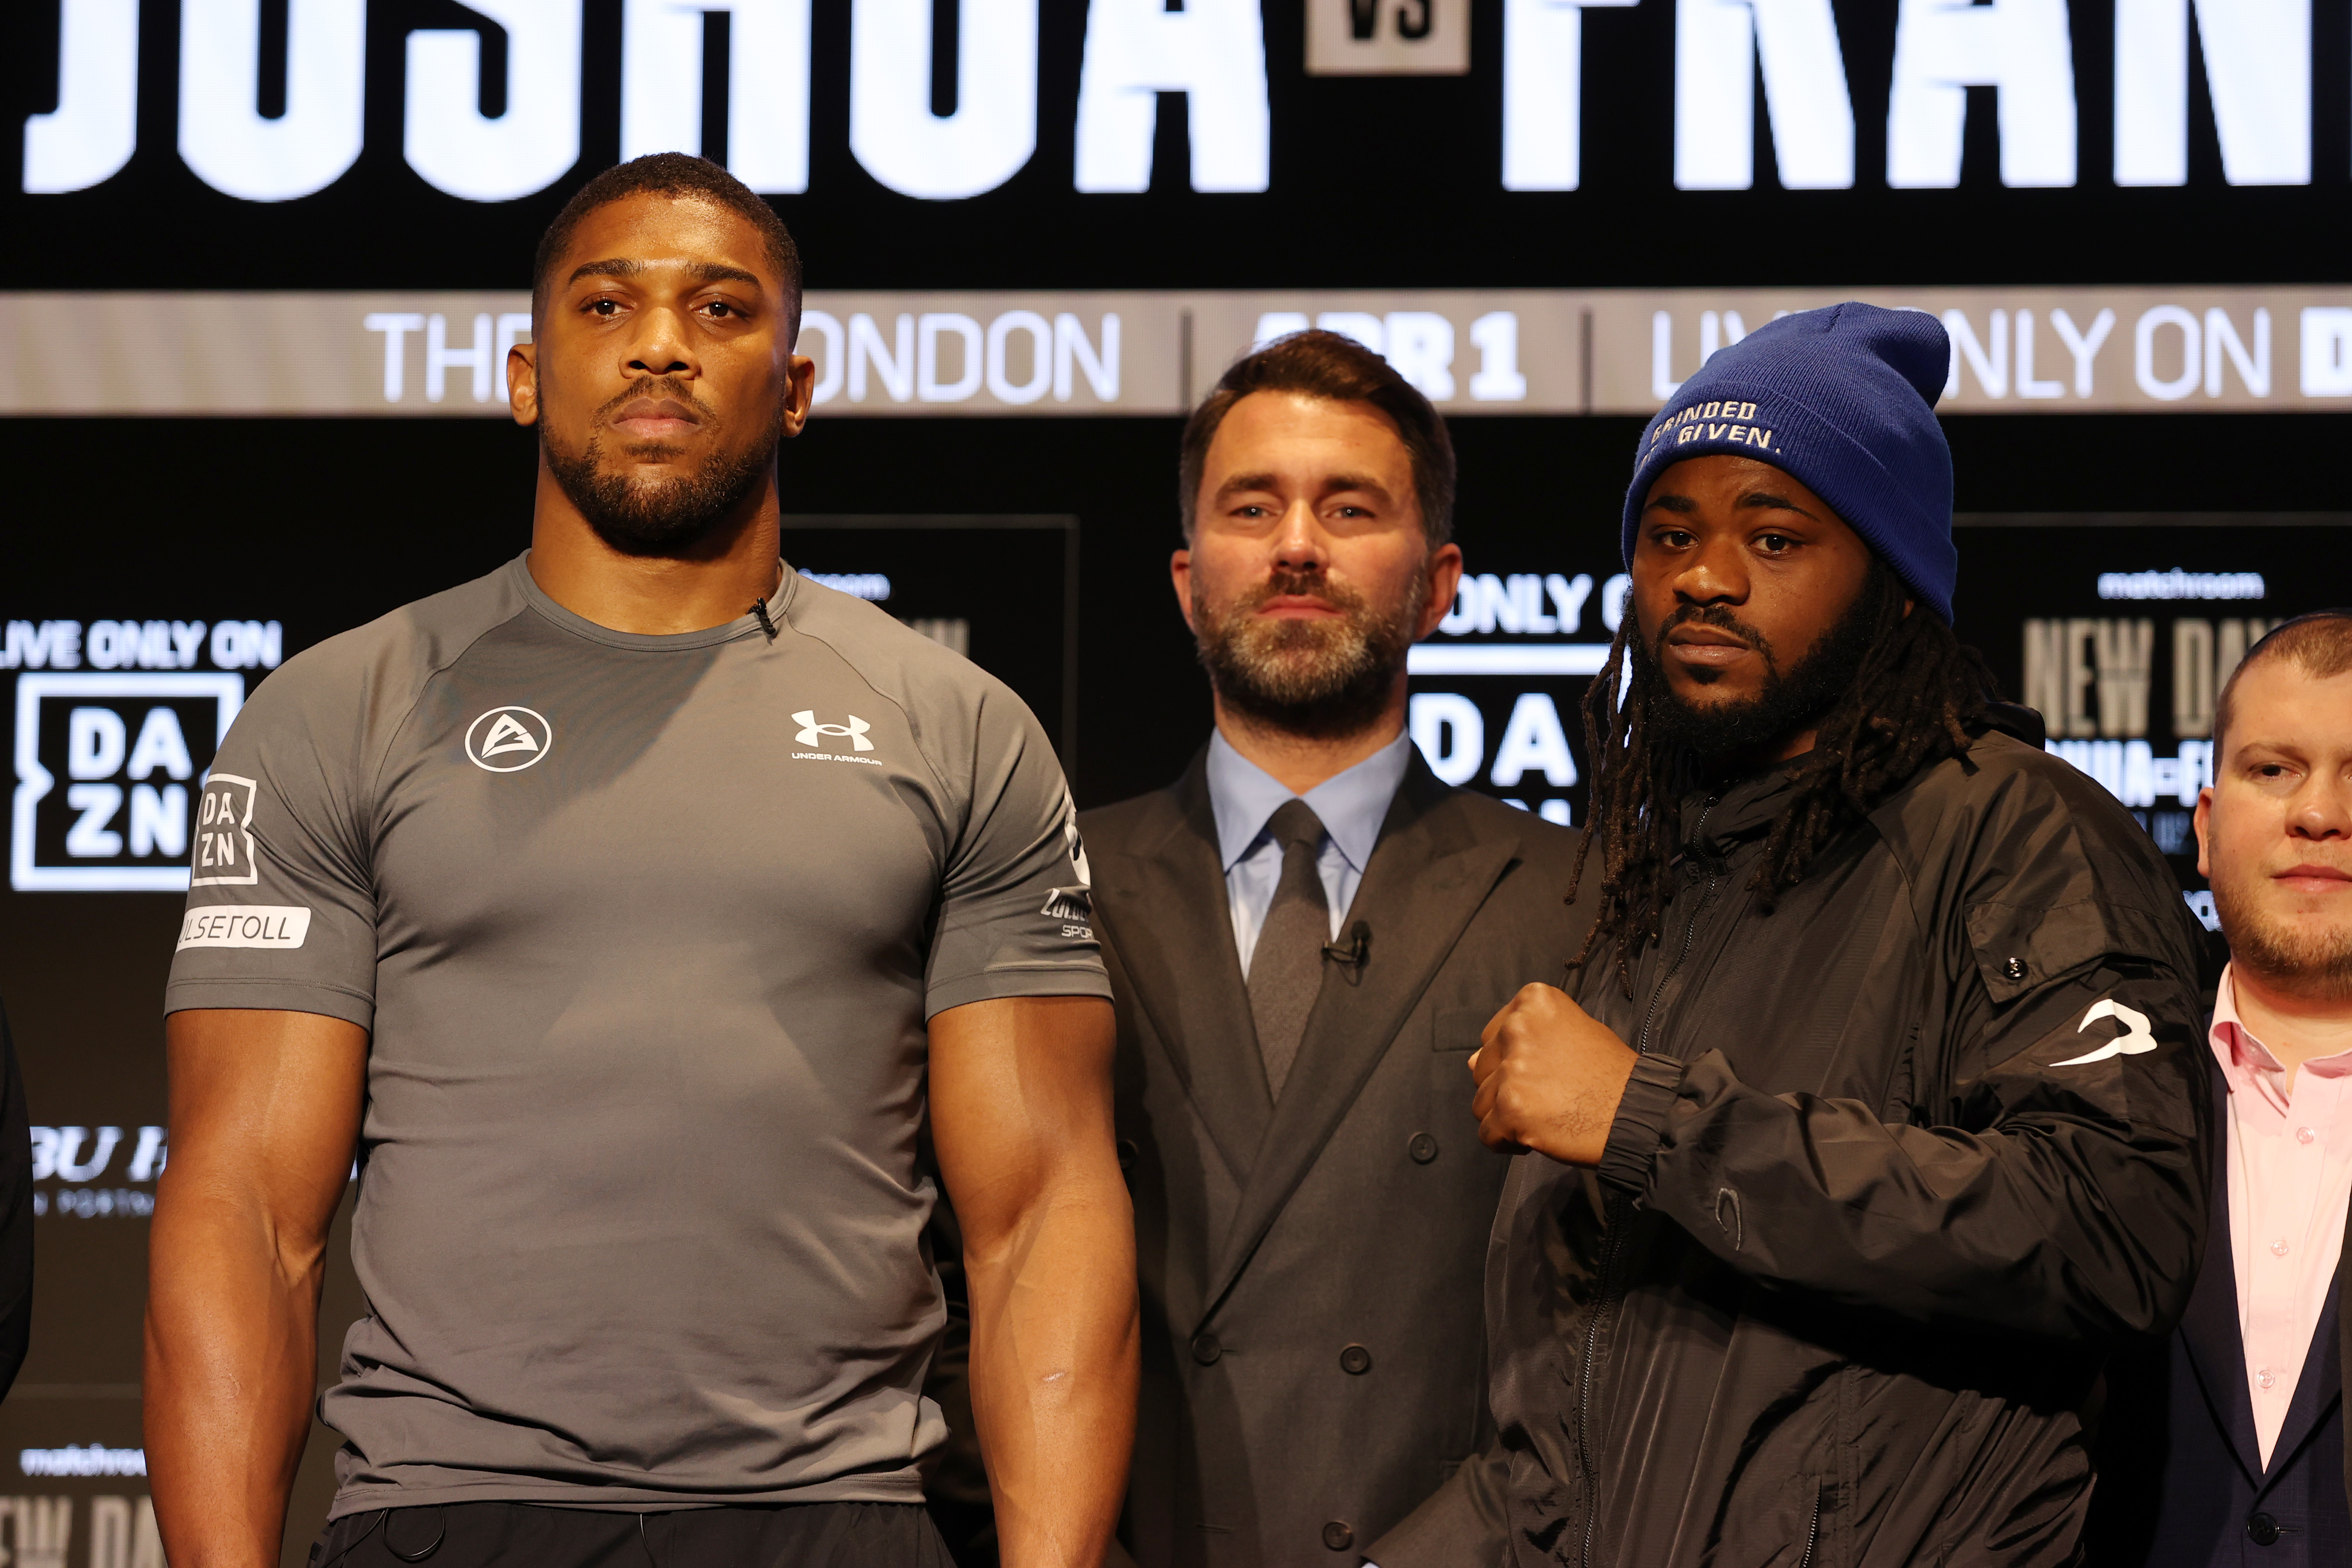 Anthony Joshua and Jermaine Franklin spoke today at their final press conference